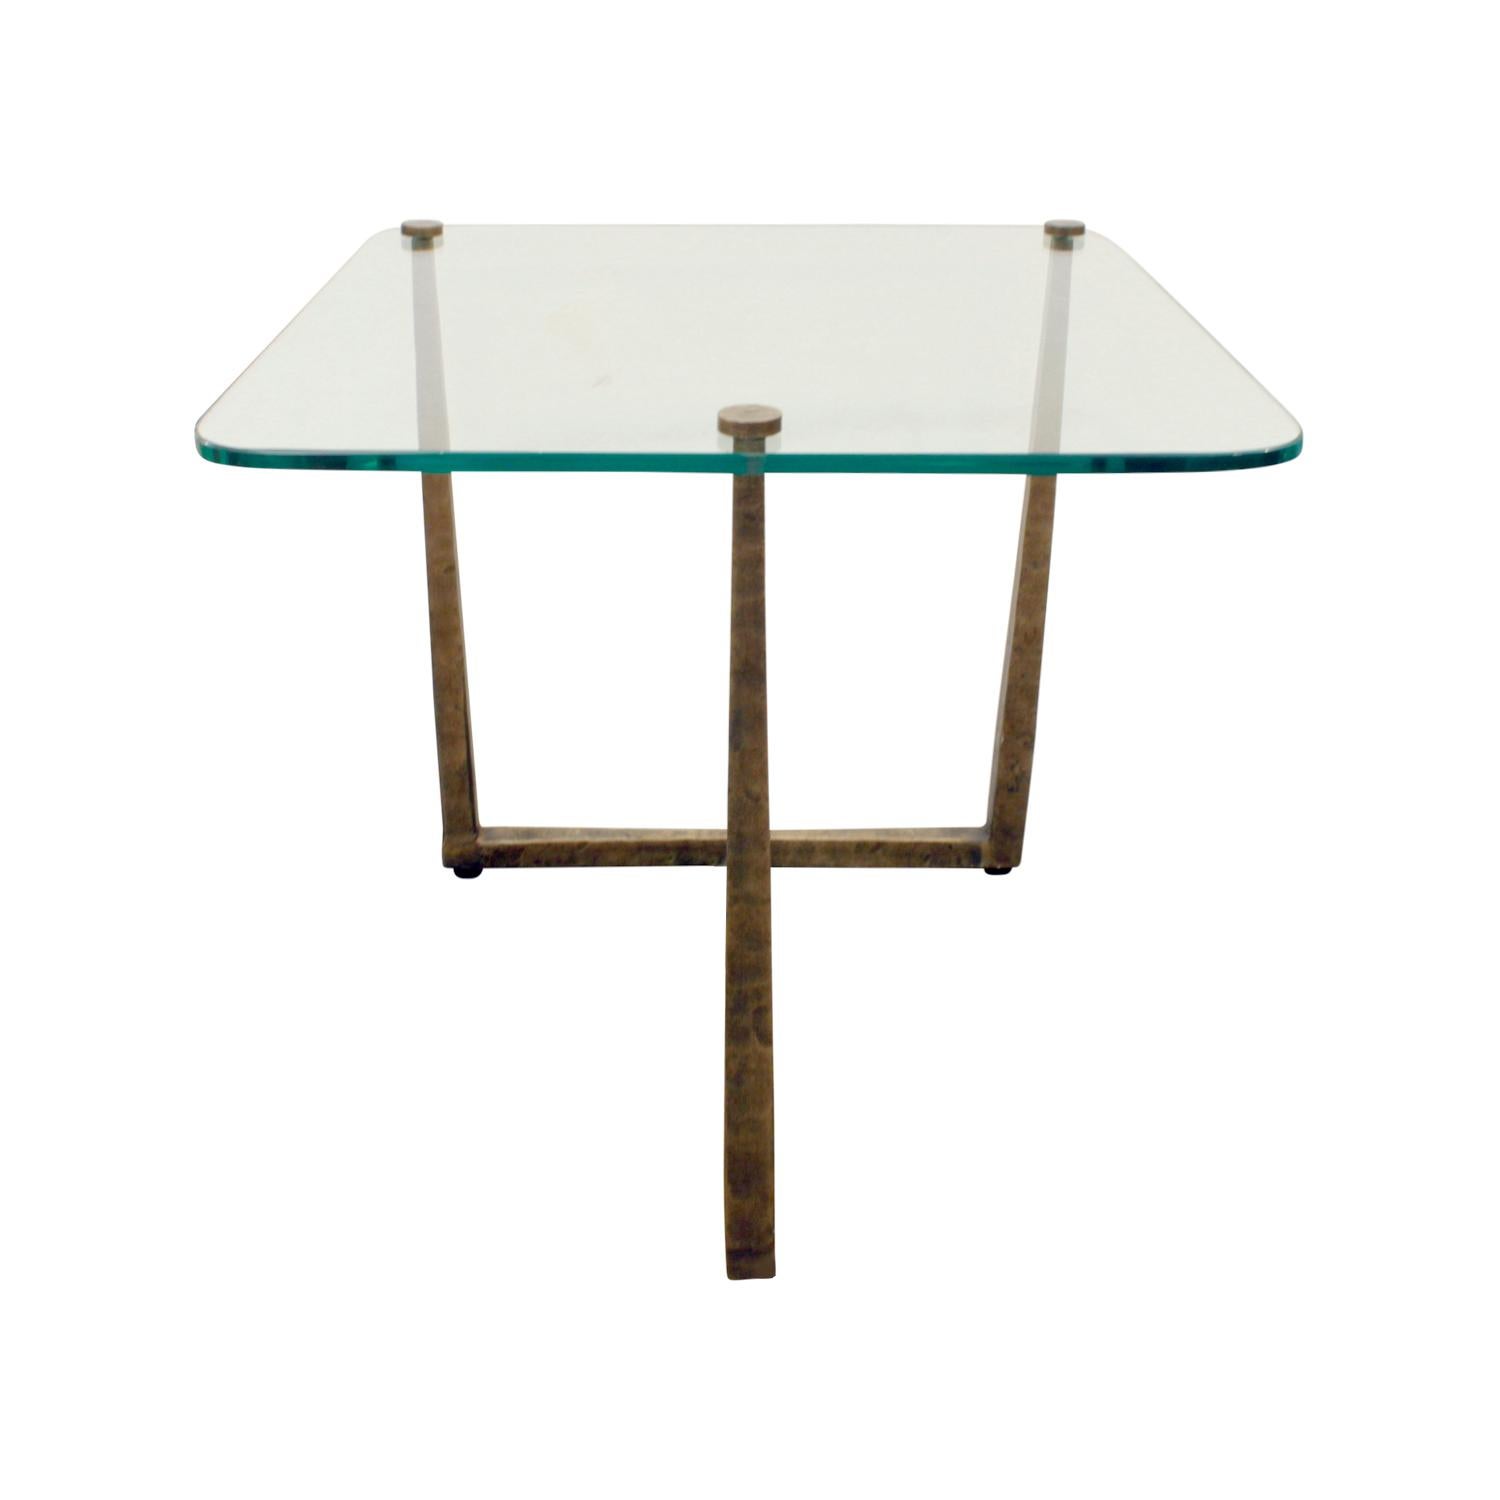 Studio made side table in hammered bronze with custom set glass top, American, 1970s.